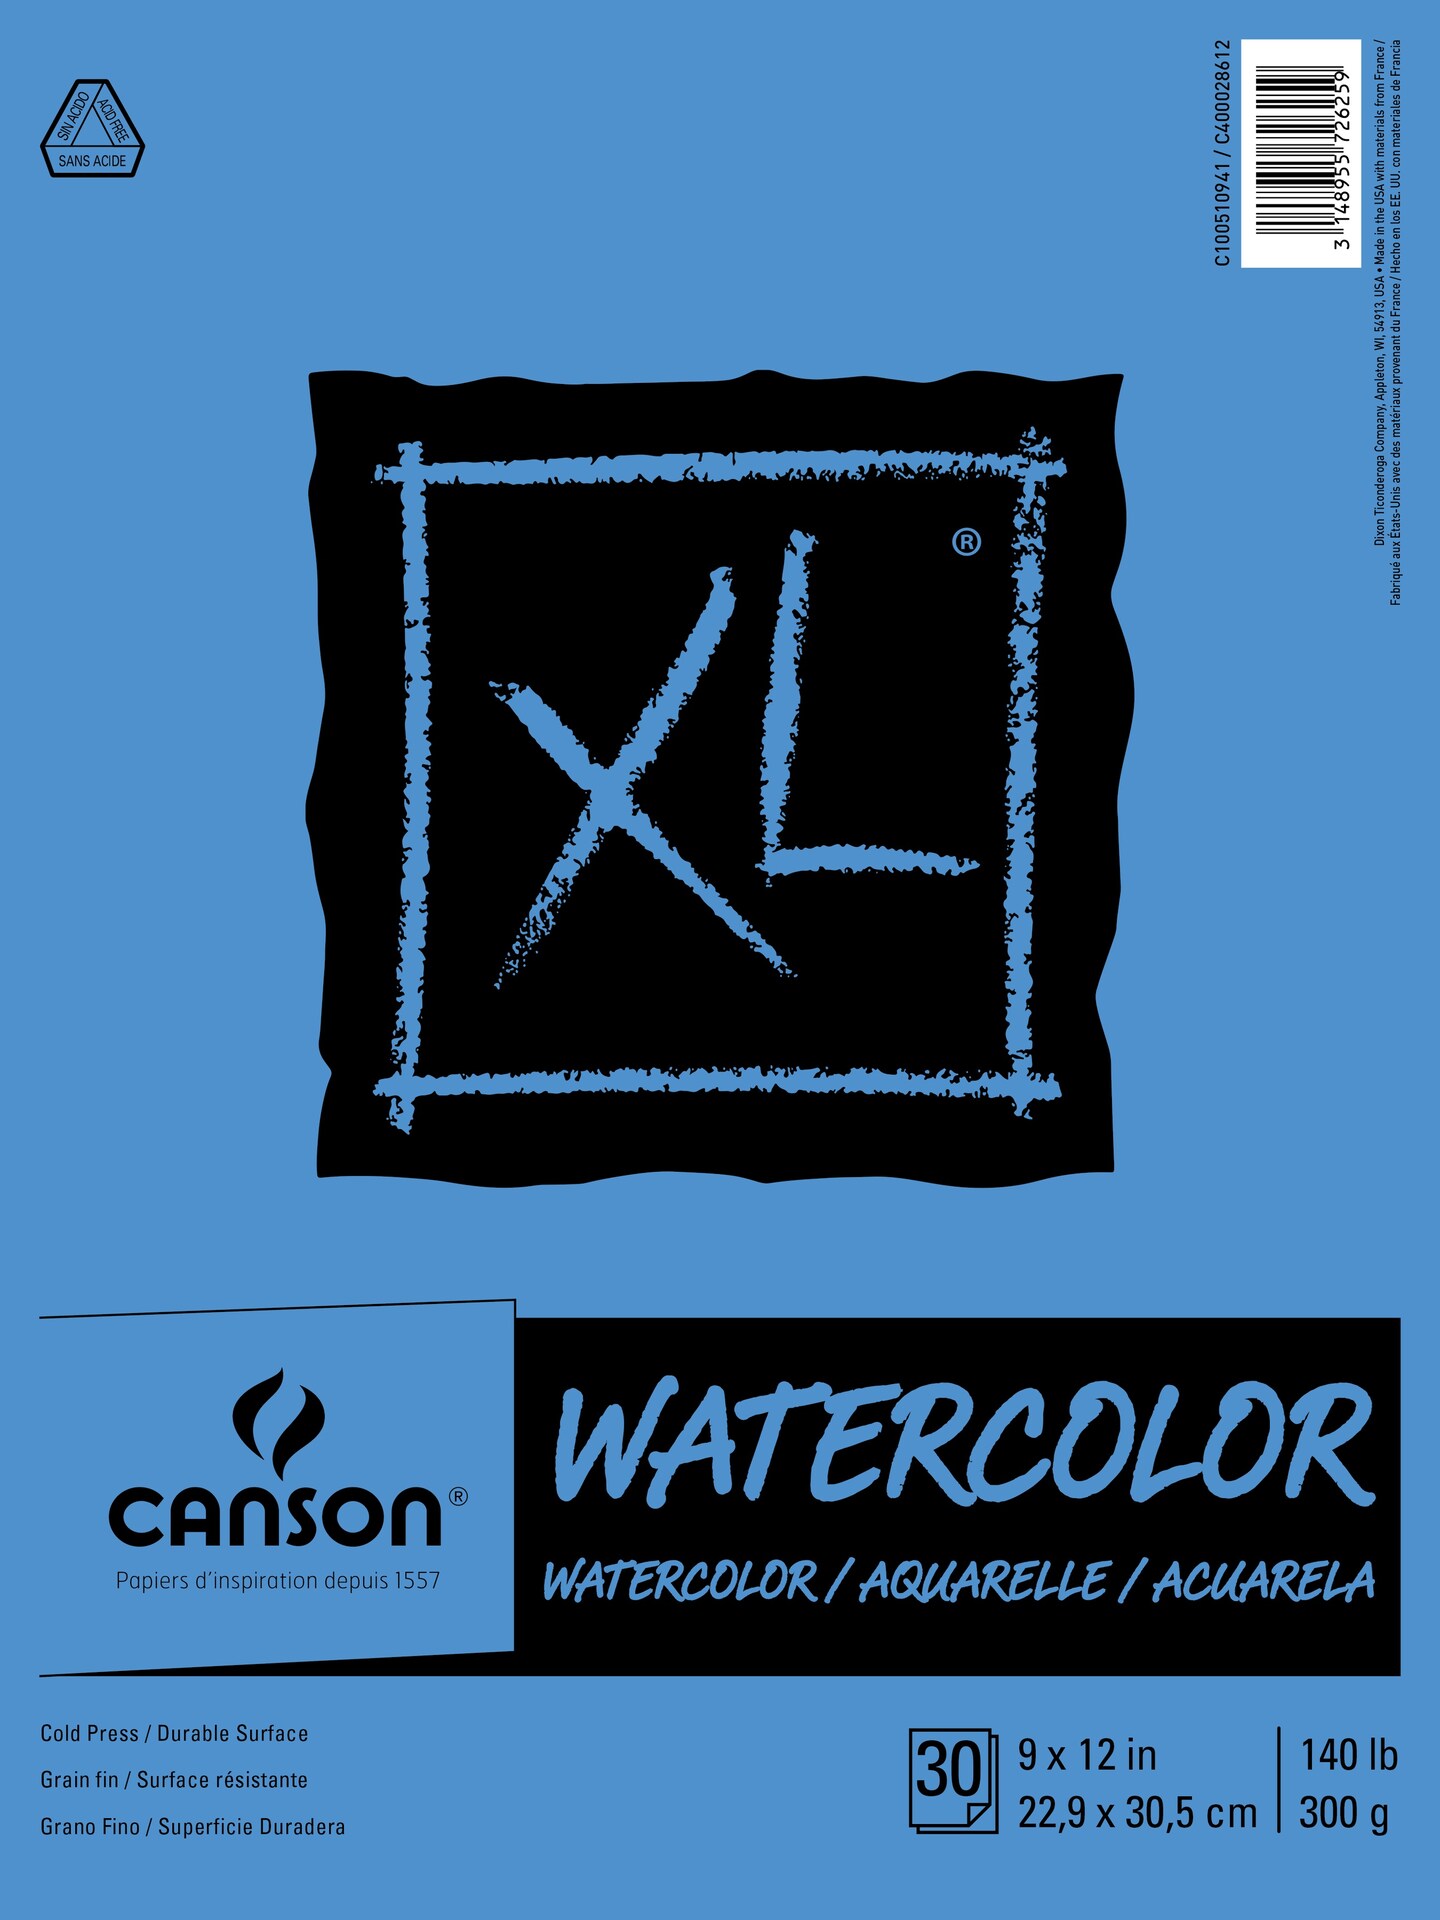 Canson XL Watercolor Paper Pad 9x12 30 Sheets